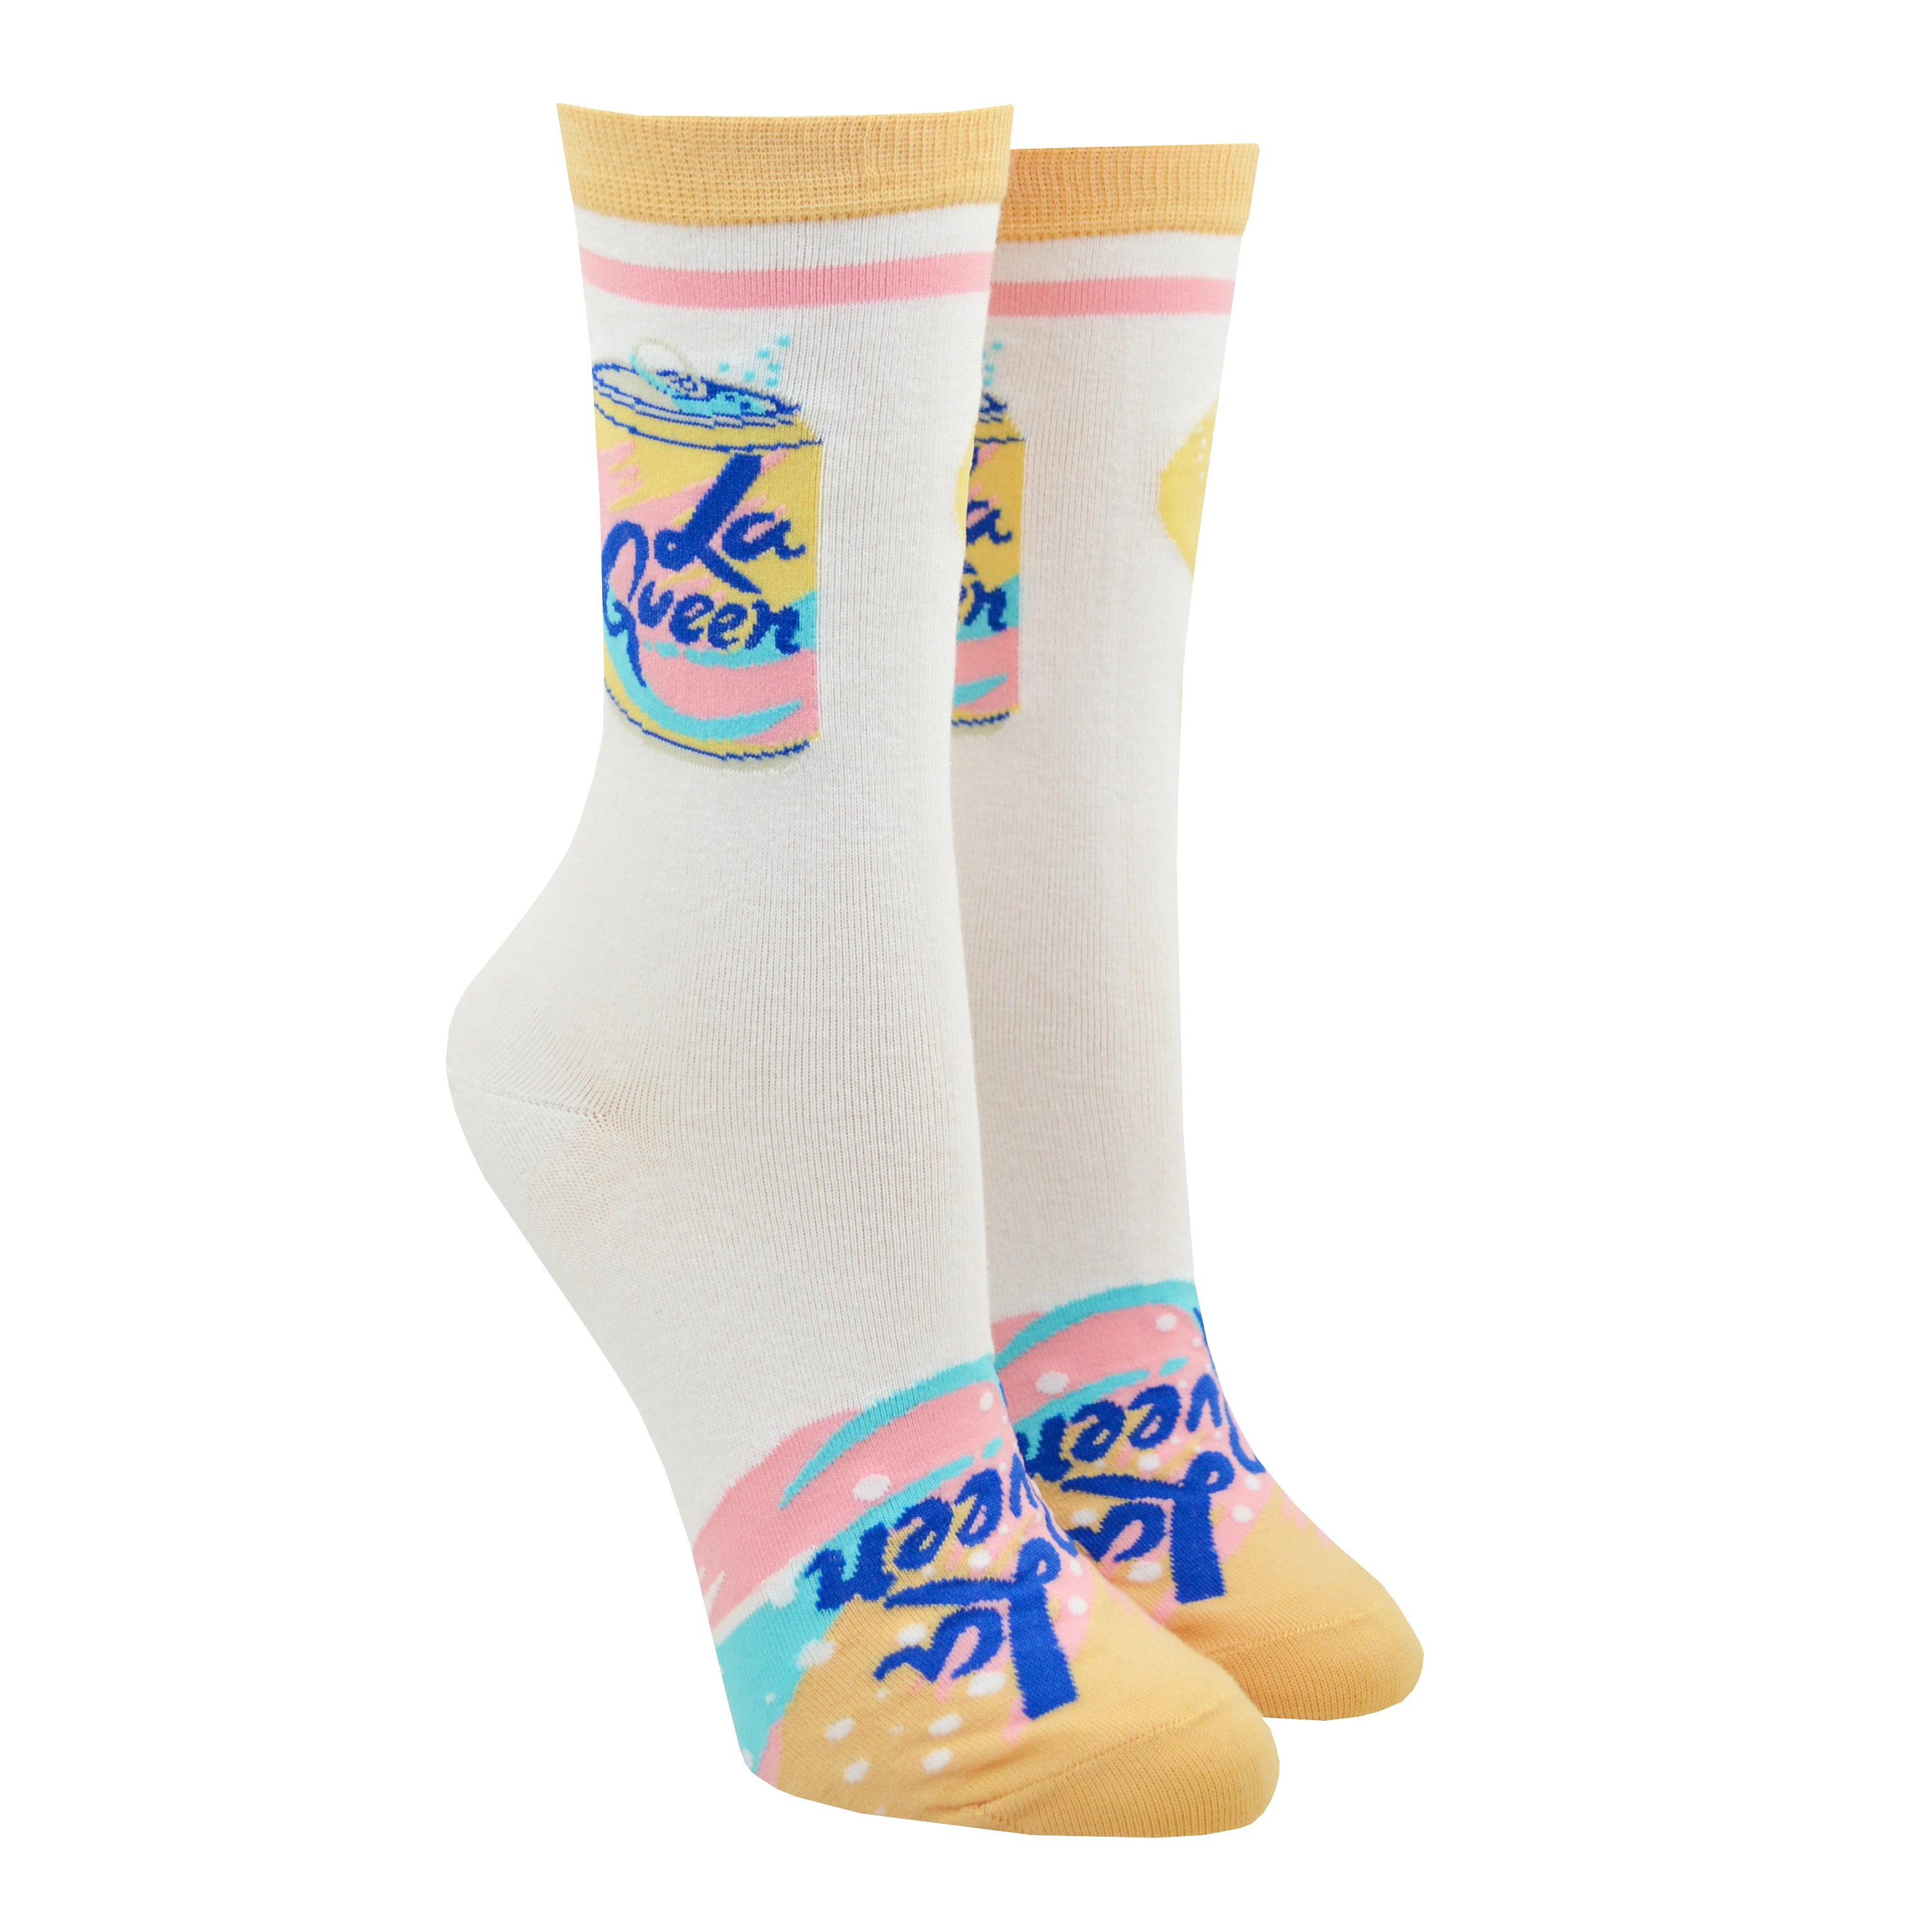 Shown on a leg form, these white cotton cute women's crew socks with a peach toe and cuff by the brand Yellow Owl Workshop feature a can that says 